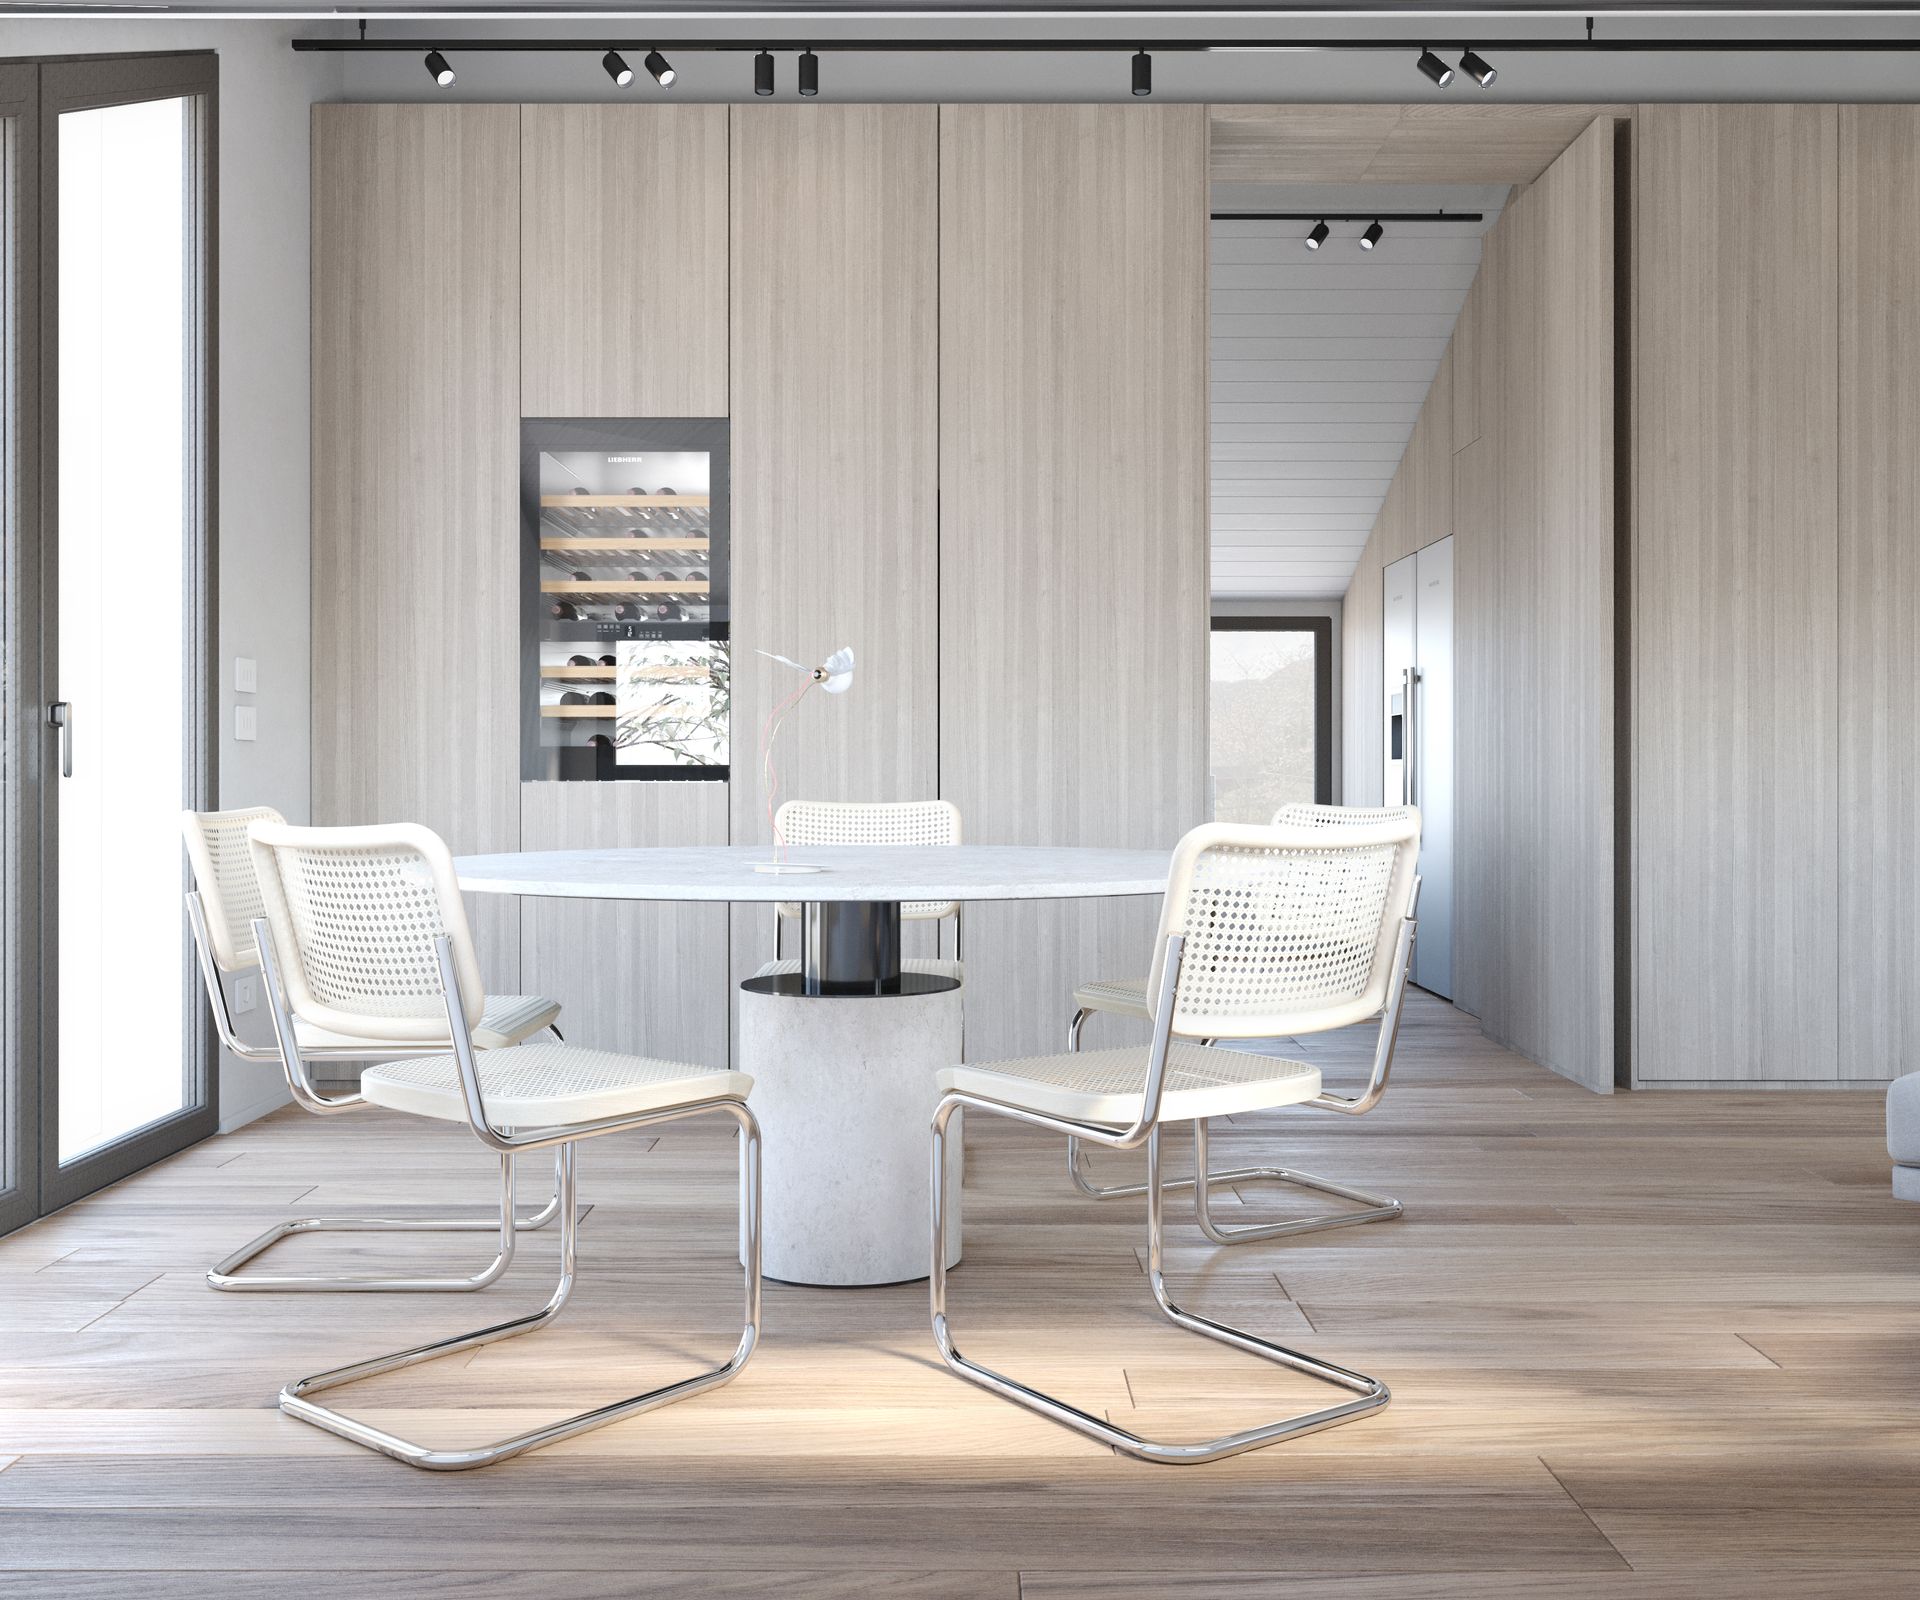 Spaces redistribution, interior design project, apartment renovation, custom-made furniture, boiserie, wood, matt laquered. Officina Magisafi architecture design - dining table rendering